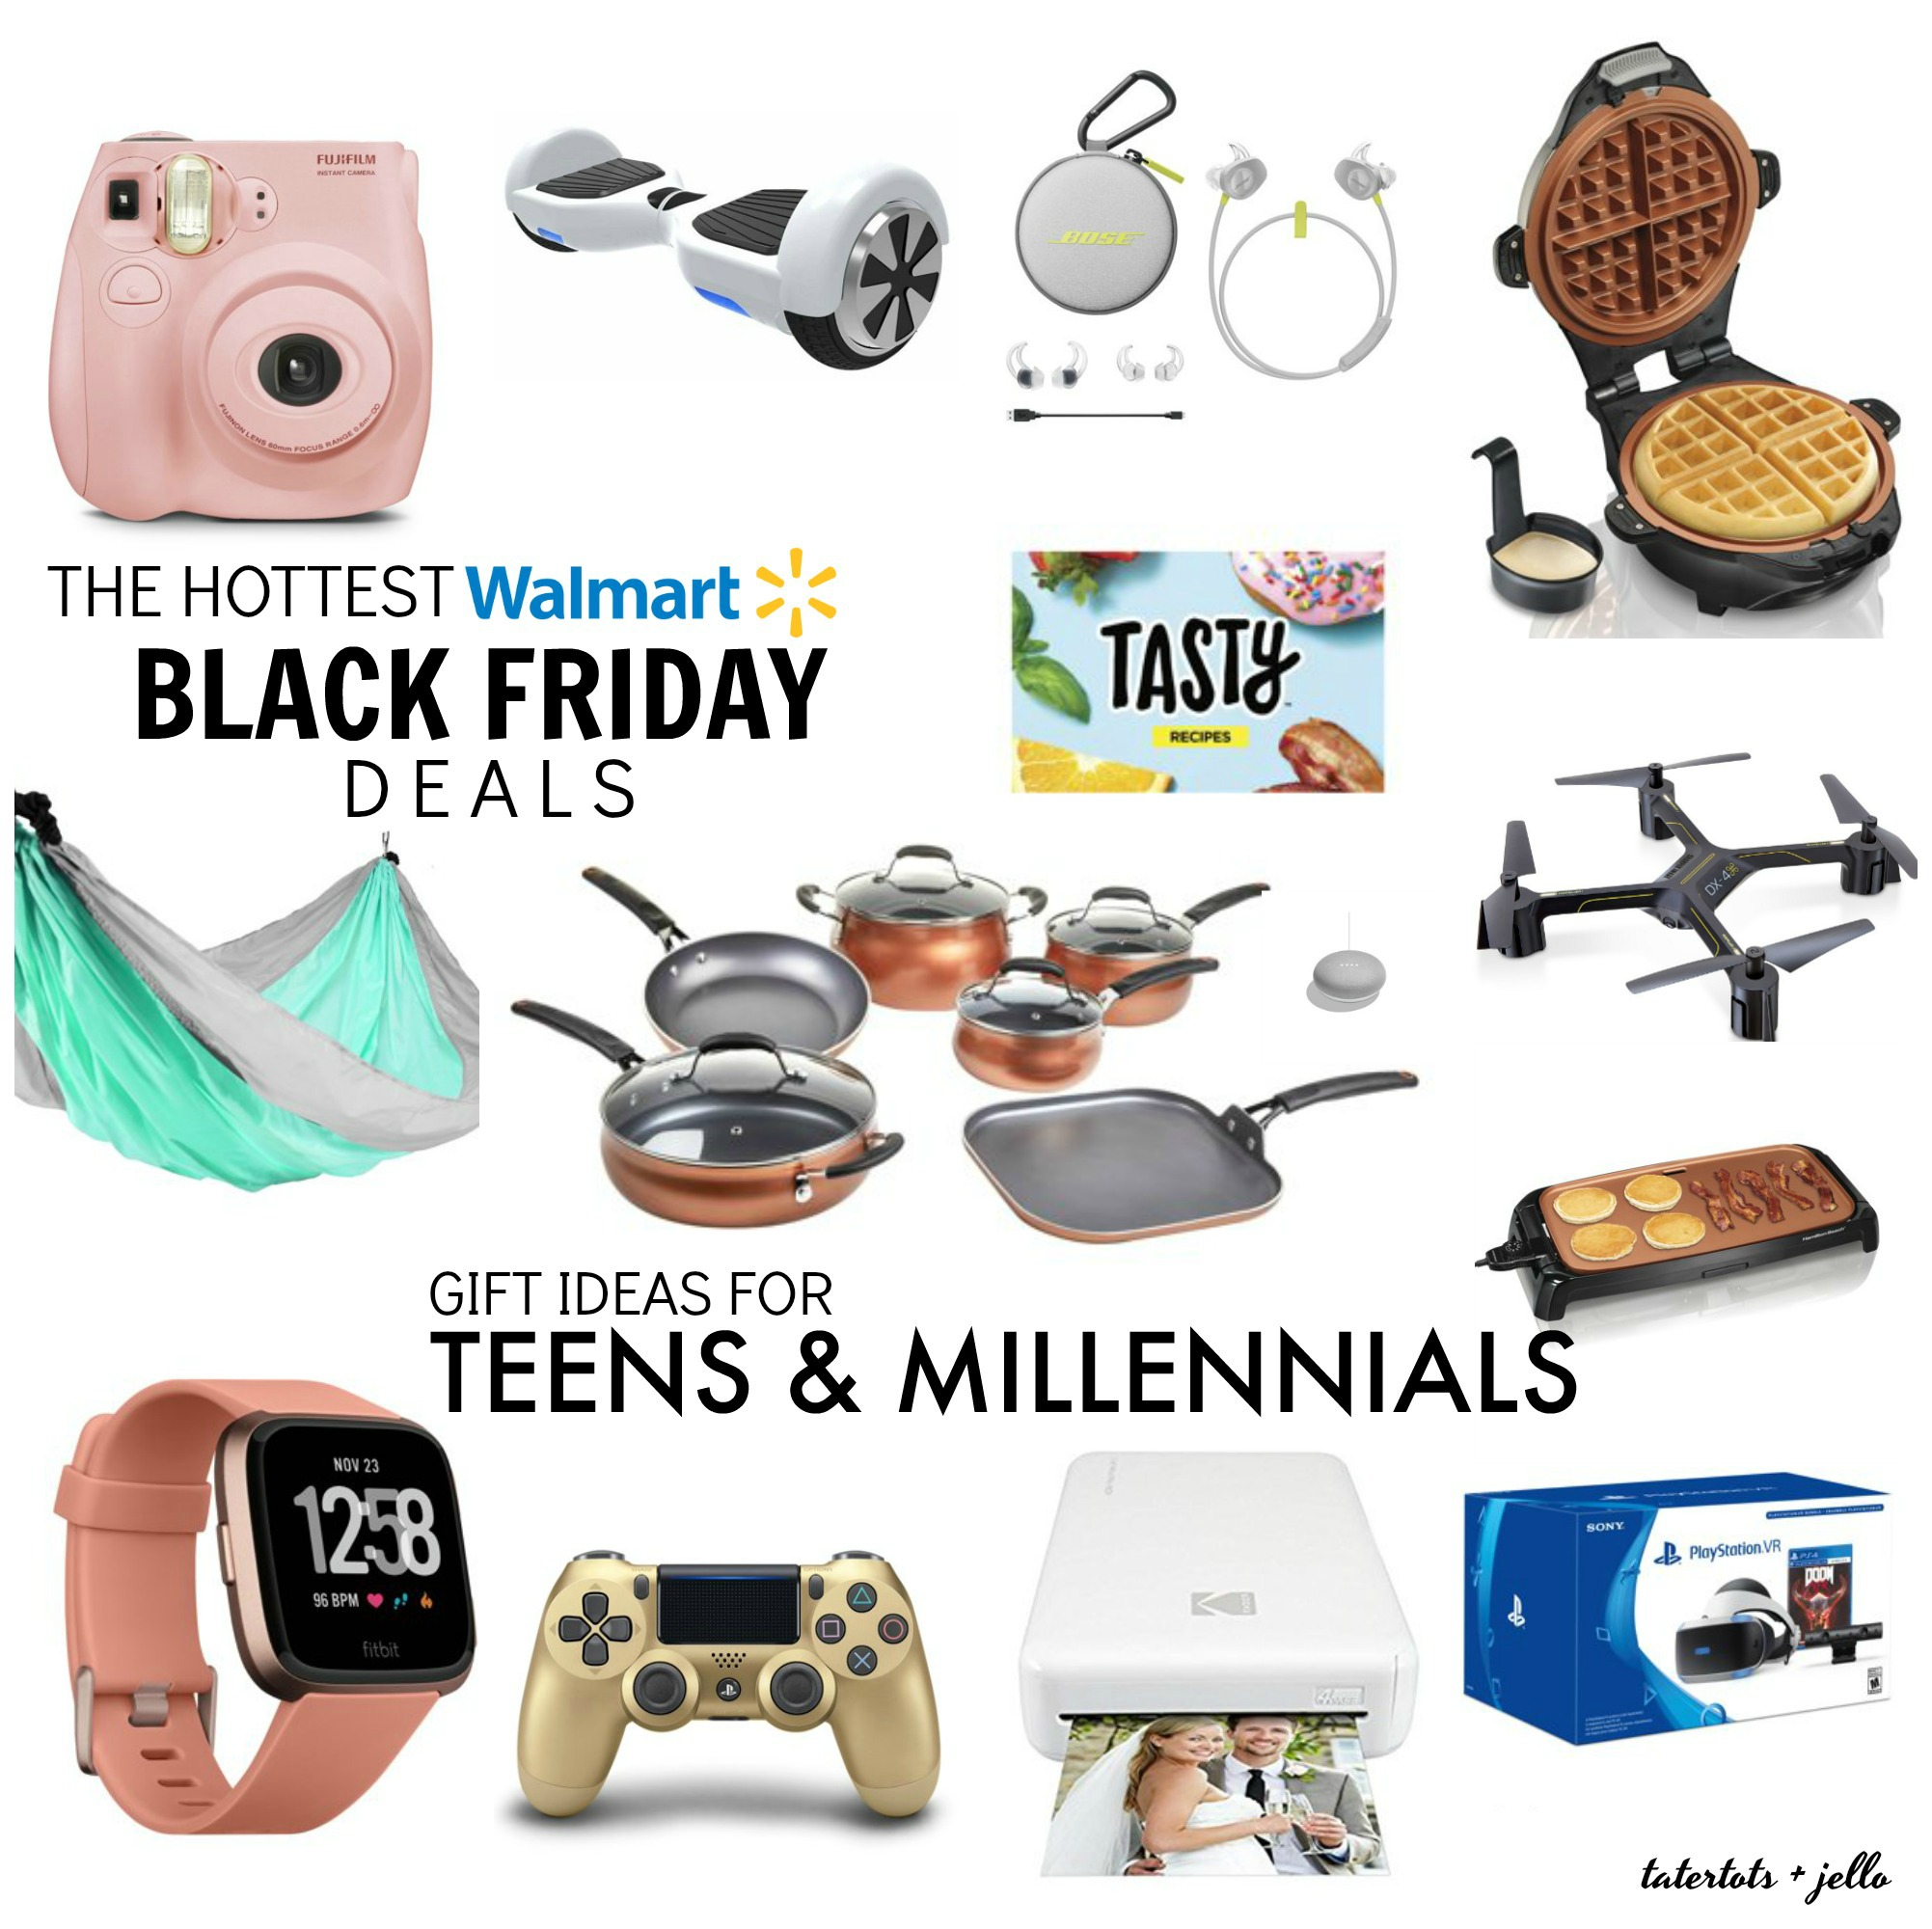 The HOTTEST Walmart Black Friday Deals - Gift Guide for Teens and Millennials! This gift guide is full of fun games, helpful electronics, and cookware teens and millennials can use as they move away to college or get their first apartment, plus equipment that will help them explore the world.